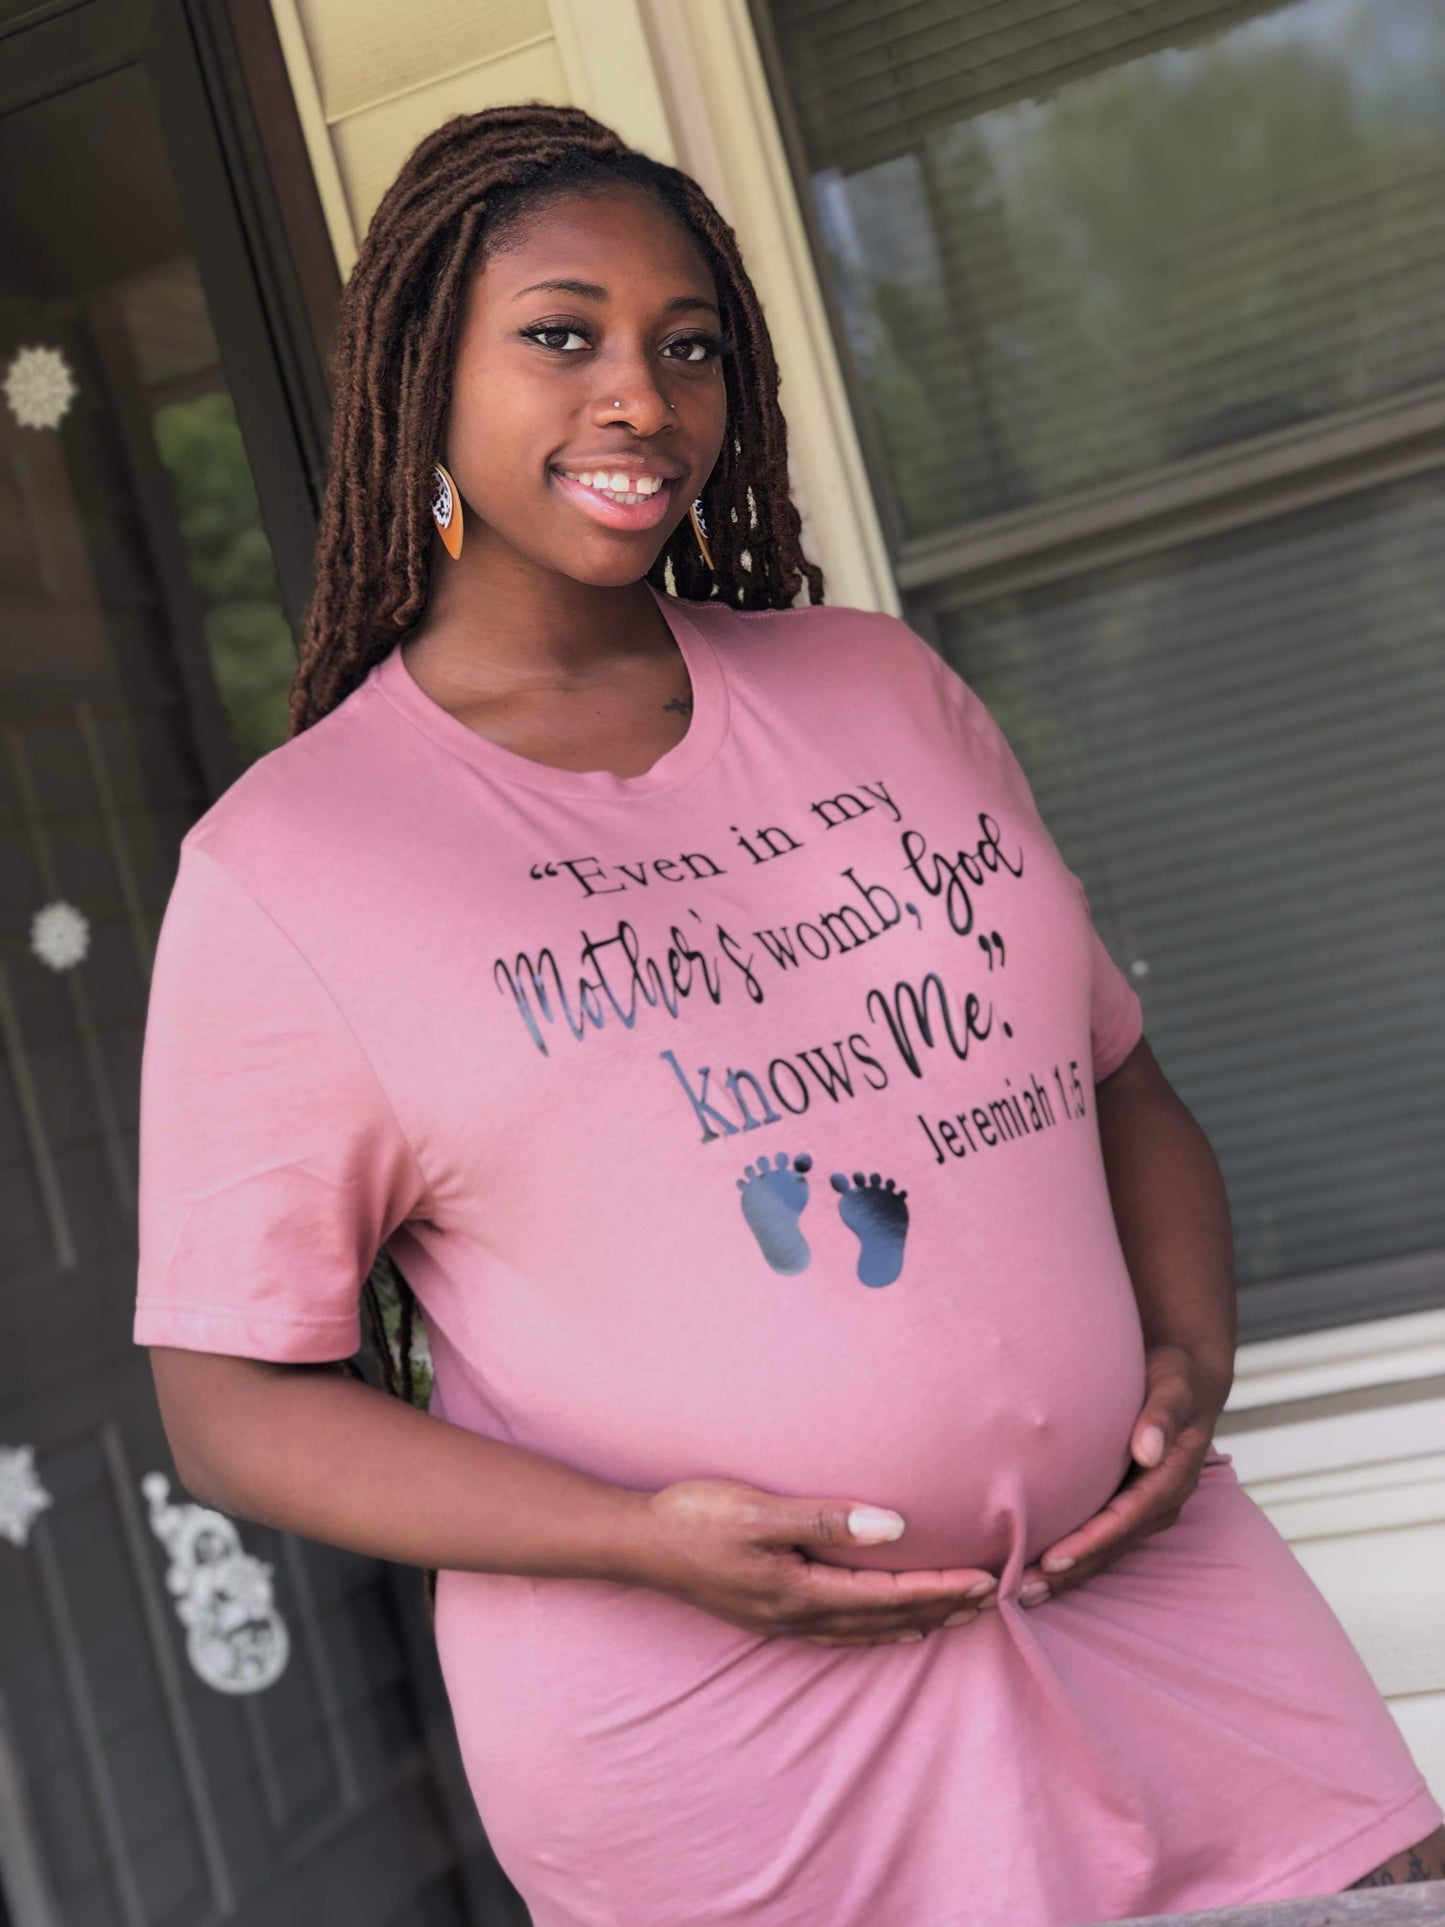 "In My Mother's Womb" Shirt